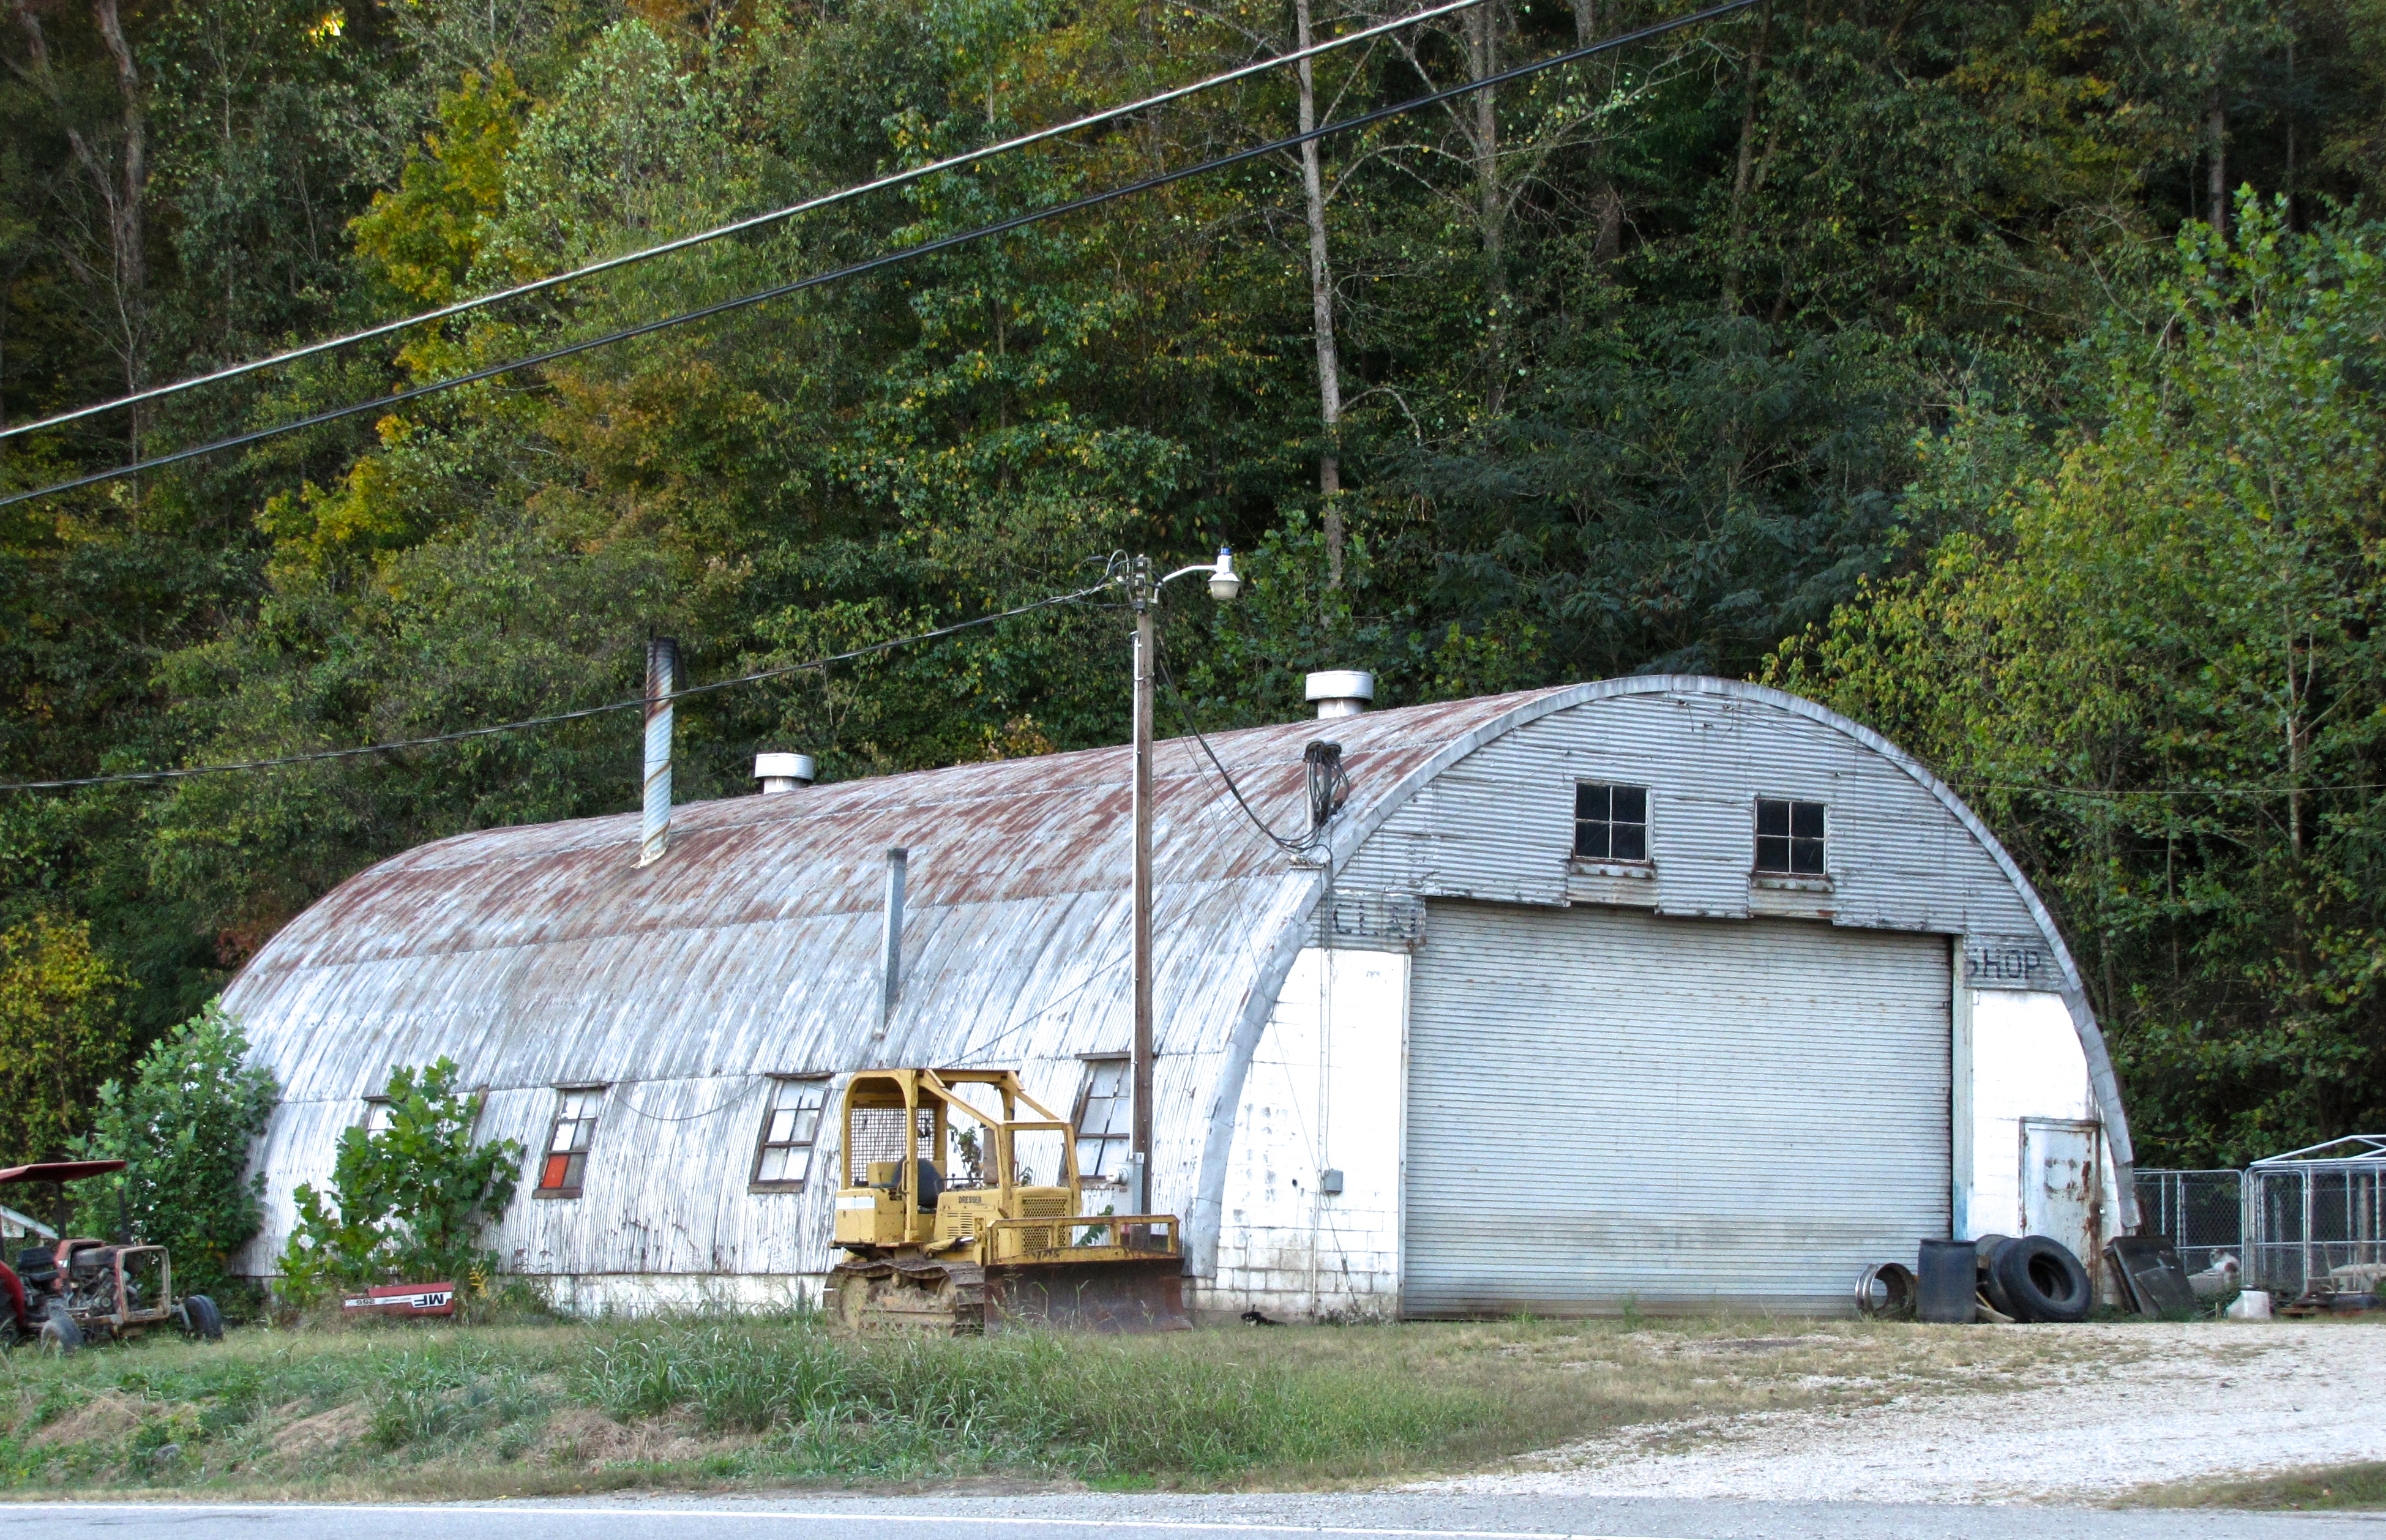 quonset hut in Raleigh, NC